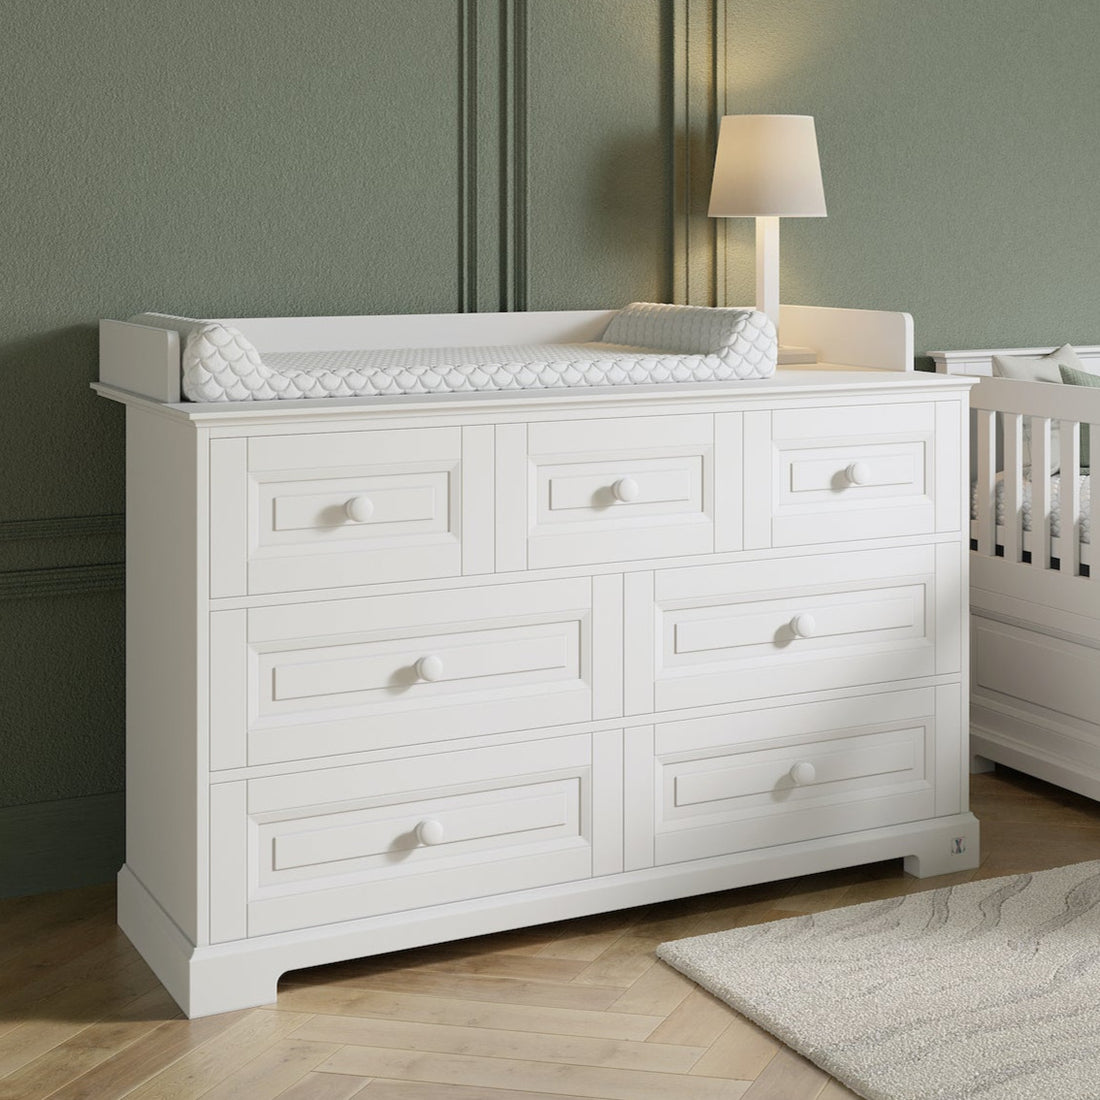 Big chest with 7 drawers | Big changing unit ROYAL | Exclusive baby &amp; kids furniture